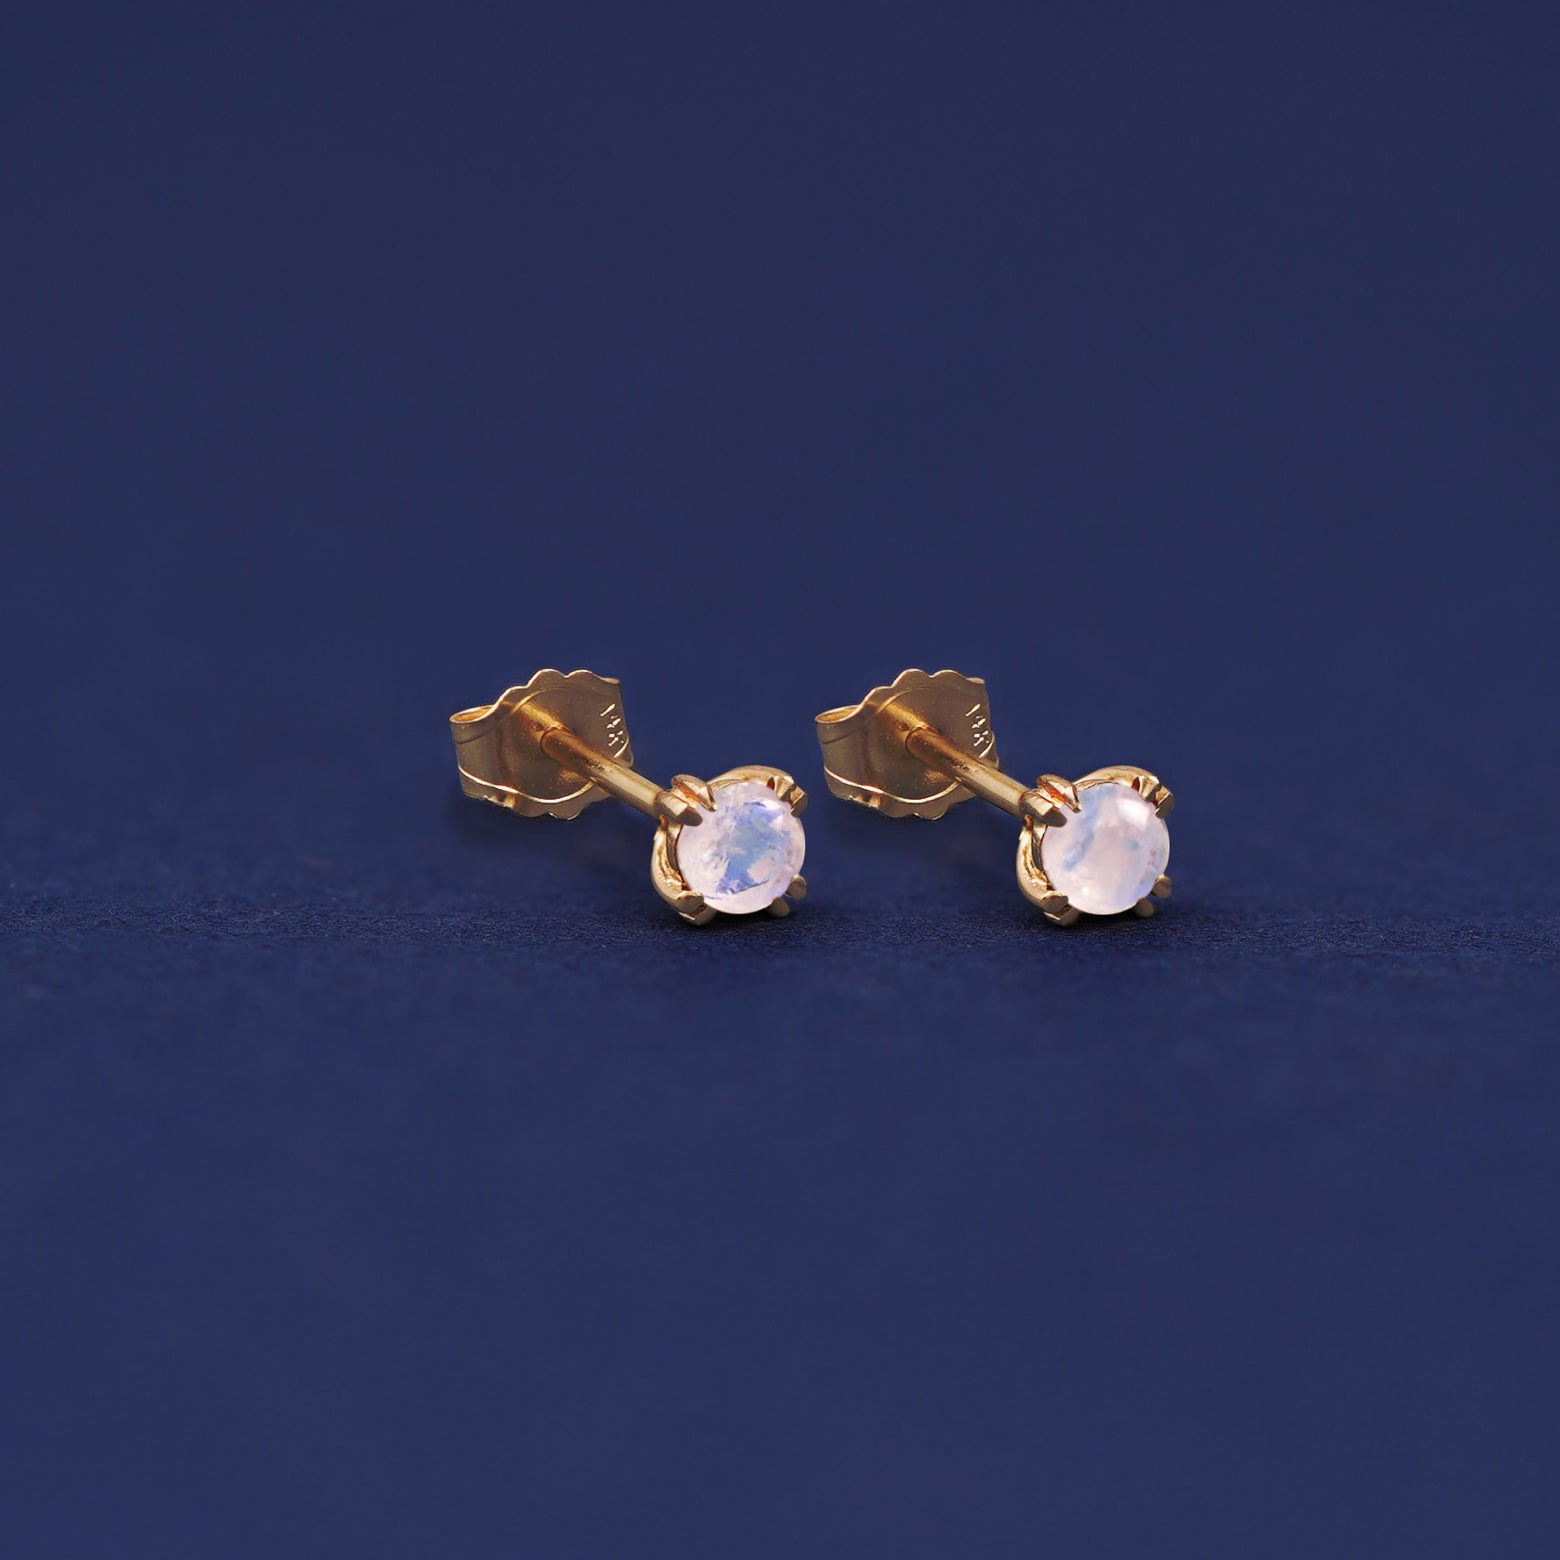 Yellow gold Moonstone Earrings shown with 14k solid gold pushback backings